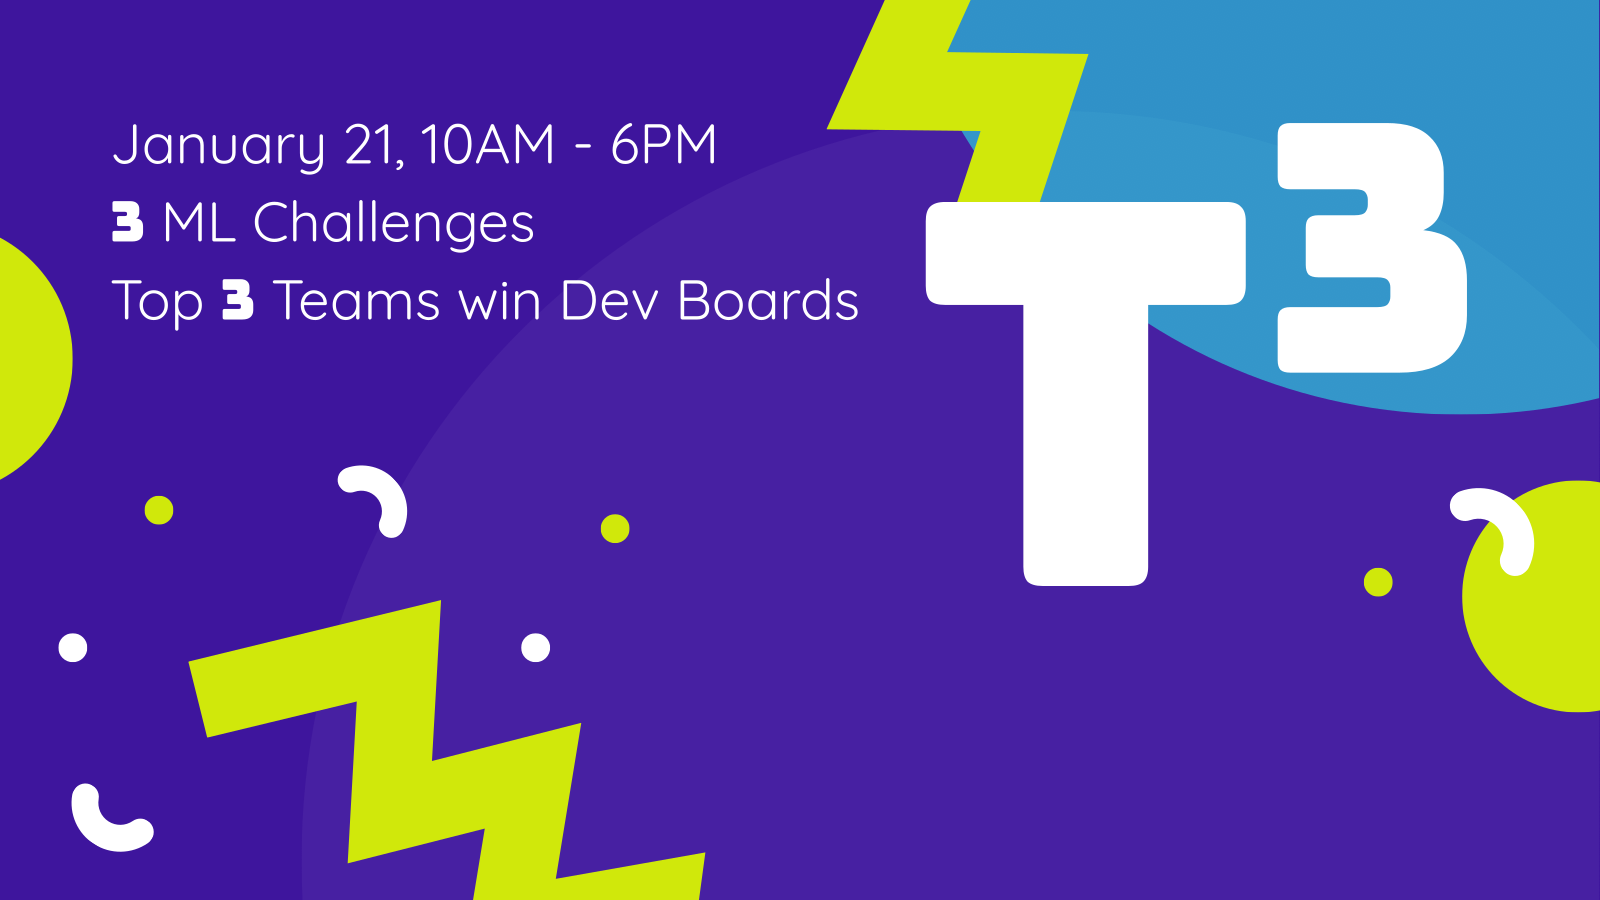 Promotional banner for Hackathon on January 21, 10 AM - 6 PM; 3 ML Challenges; Top 3 Teams win Dev Boards